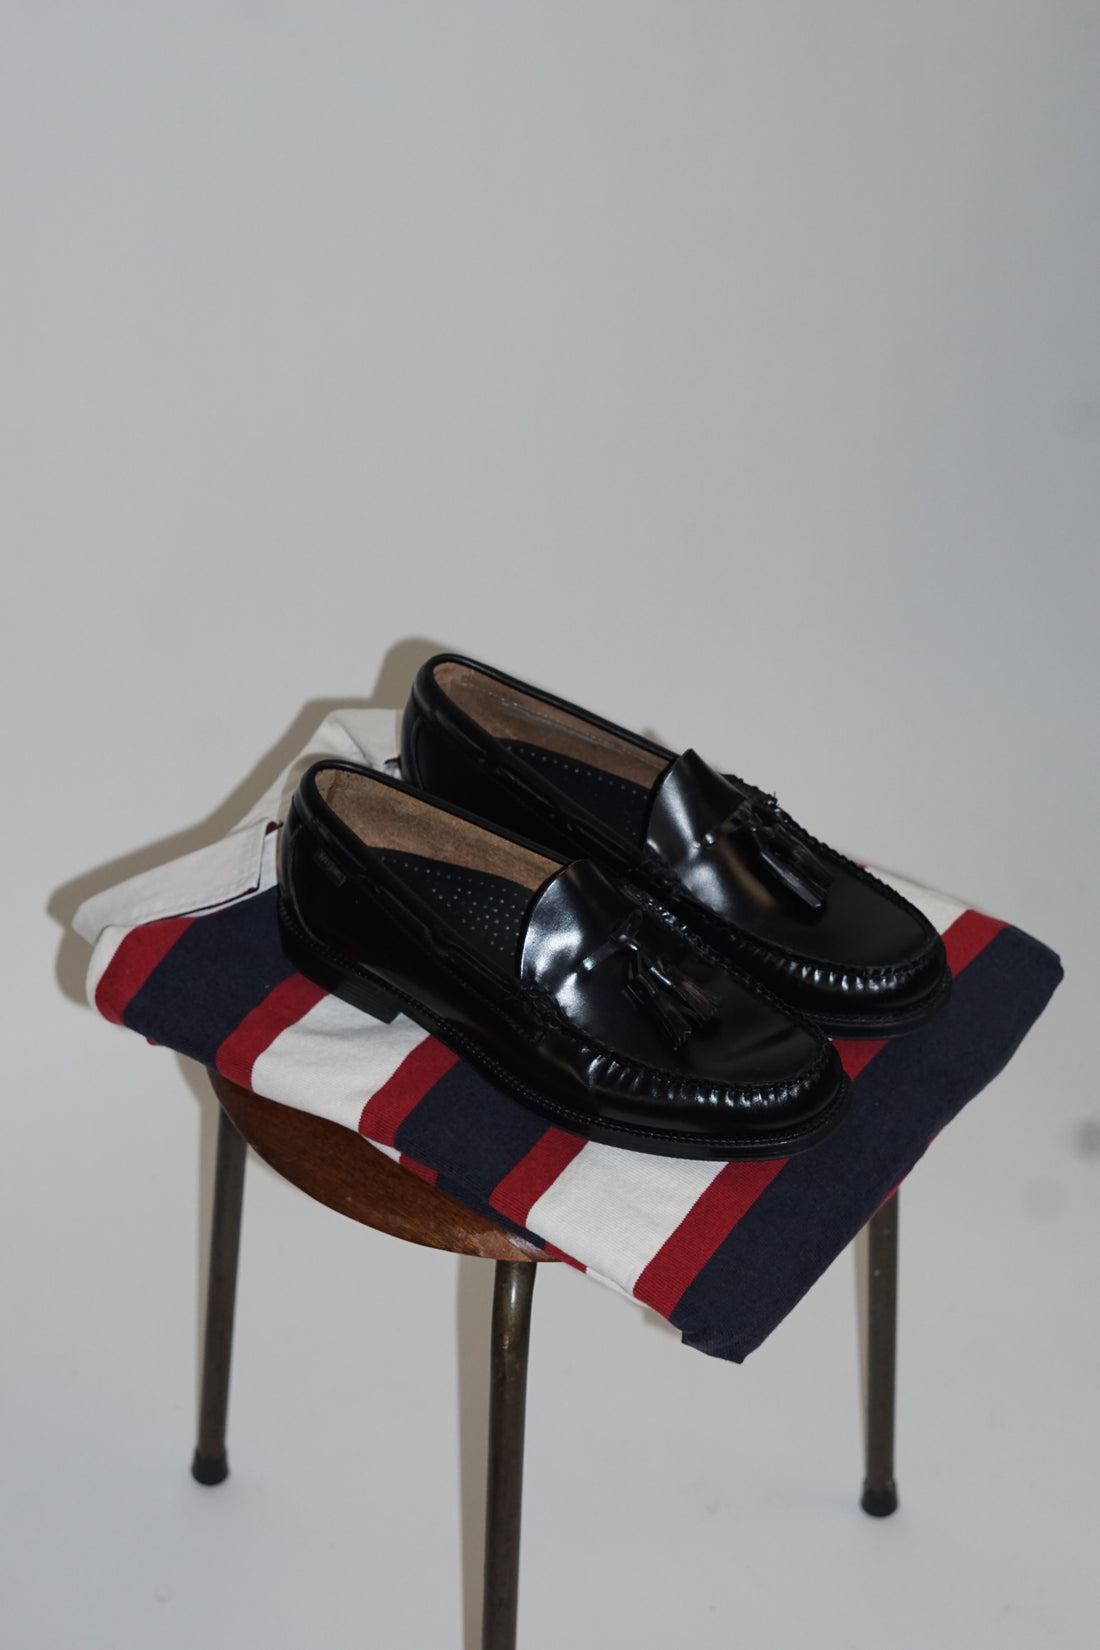 G.H. Bass Black Weejuns Tassel Loafers